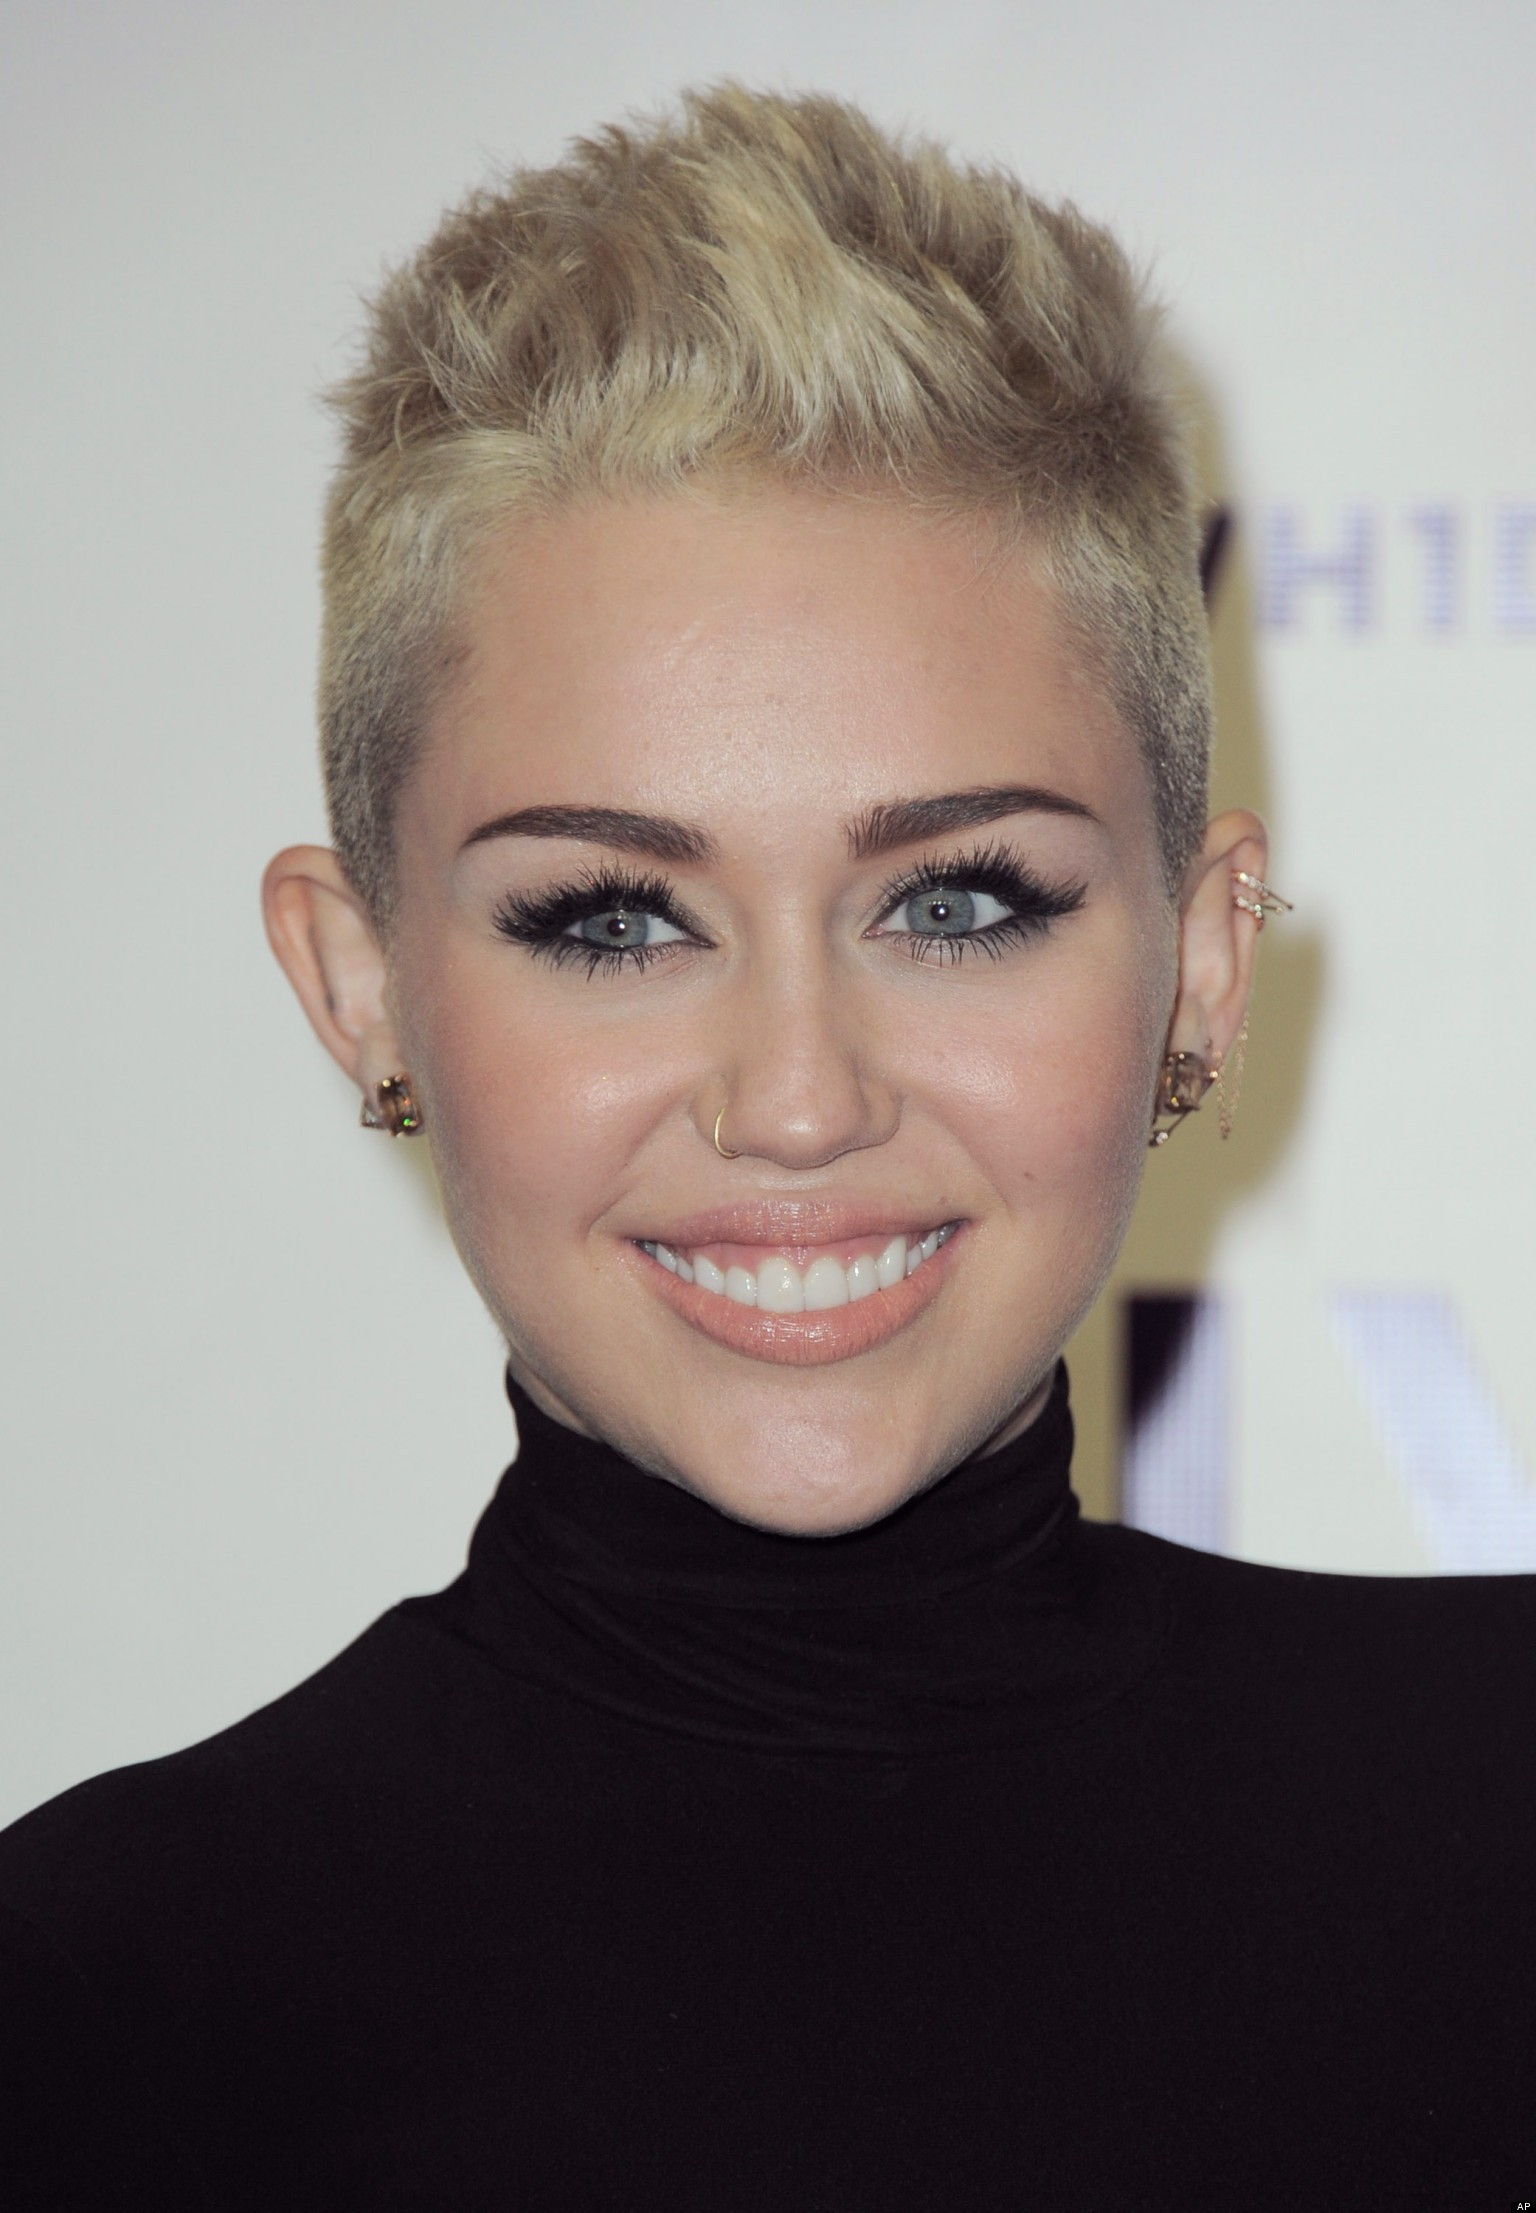 Pharrell Williams & Miley Cyrus: Producer Says Miley's New Work Is ...